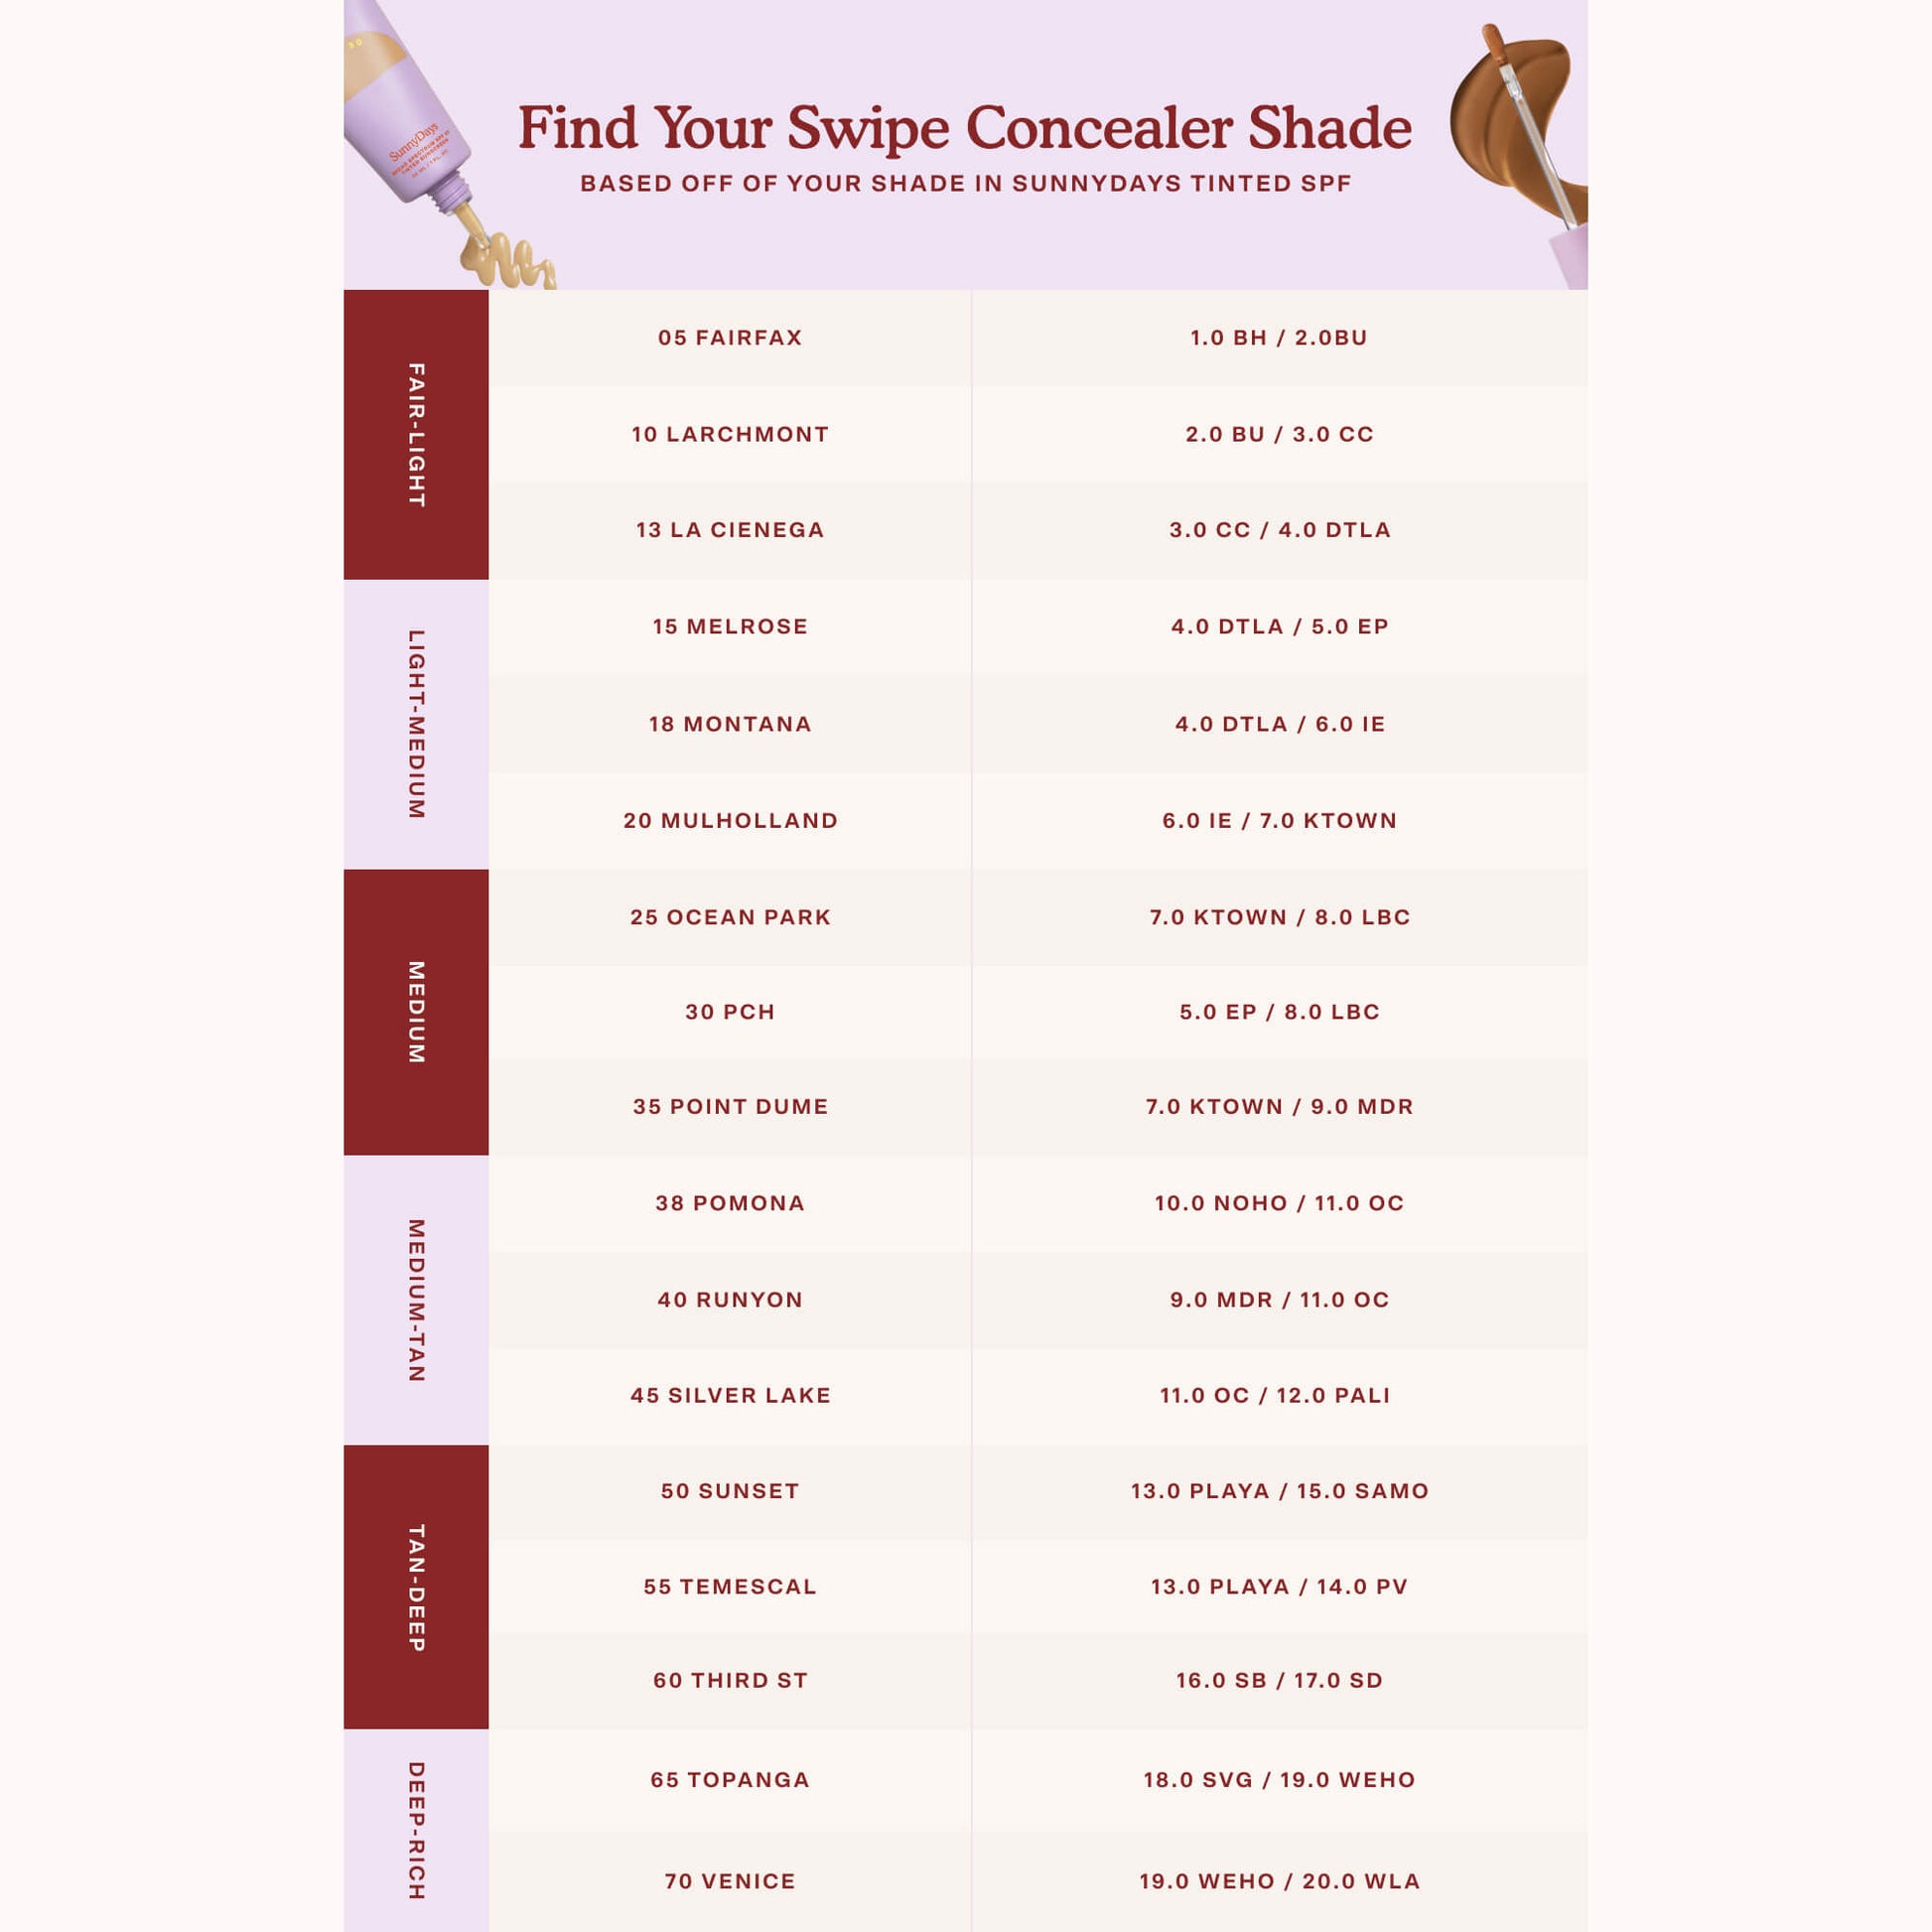 [Shared - All 20 shades of Tower 28 Beauty Swipe Serum Concealer in reference to all SunnyDays SPF 30 Tinted Sunscreen shades for easy comparison and shade matching